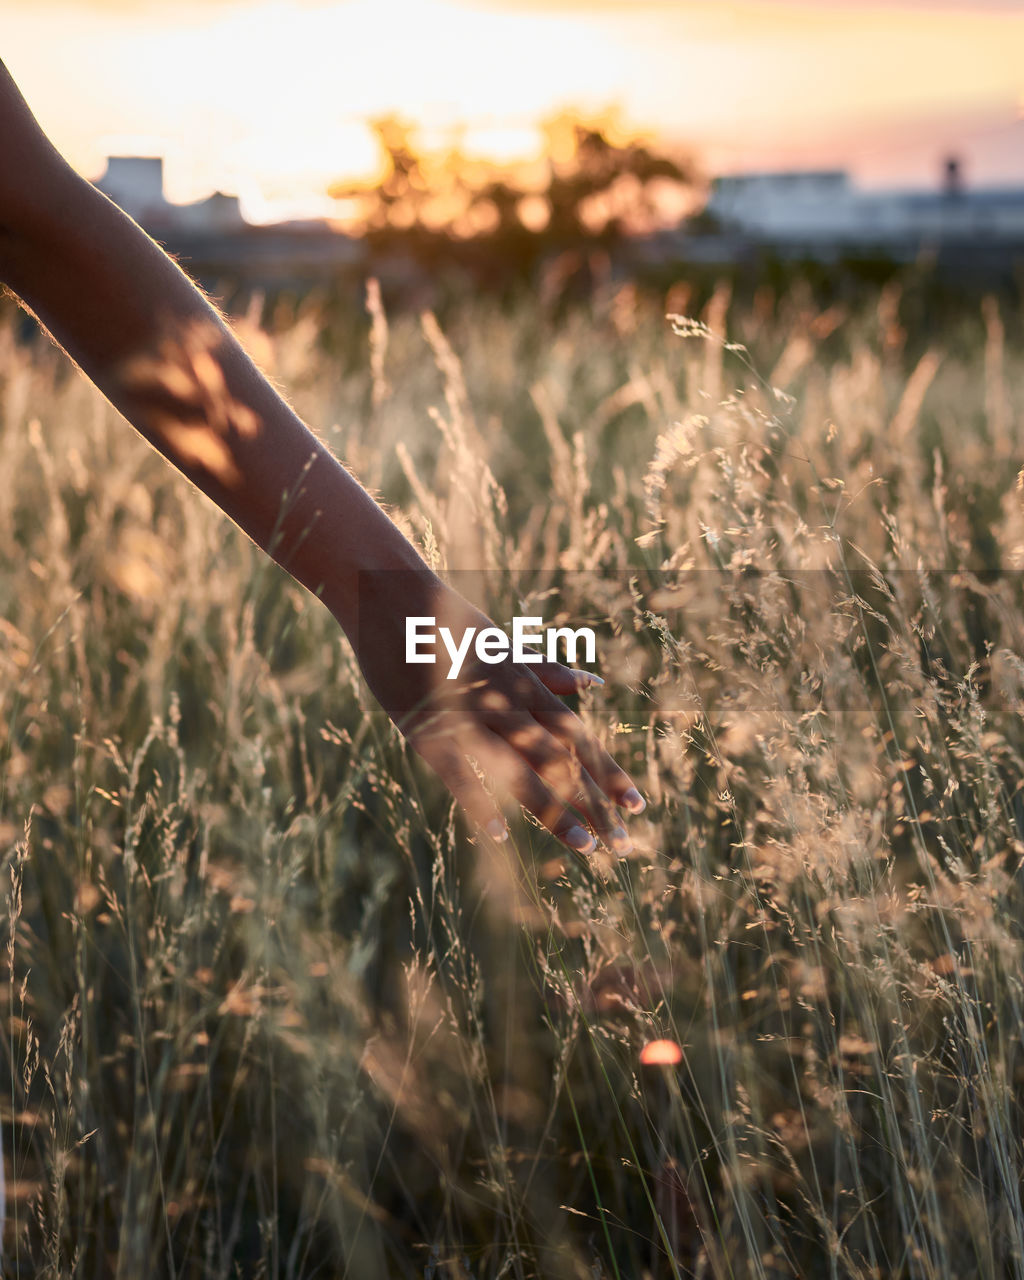 Close-up where a woman's hand caresses some grass at sunset